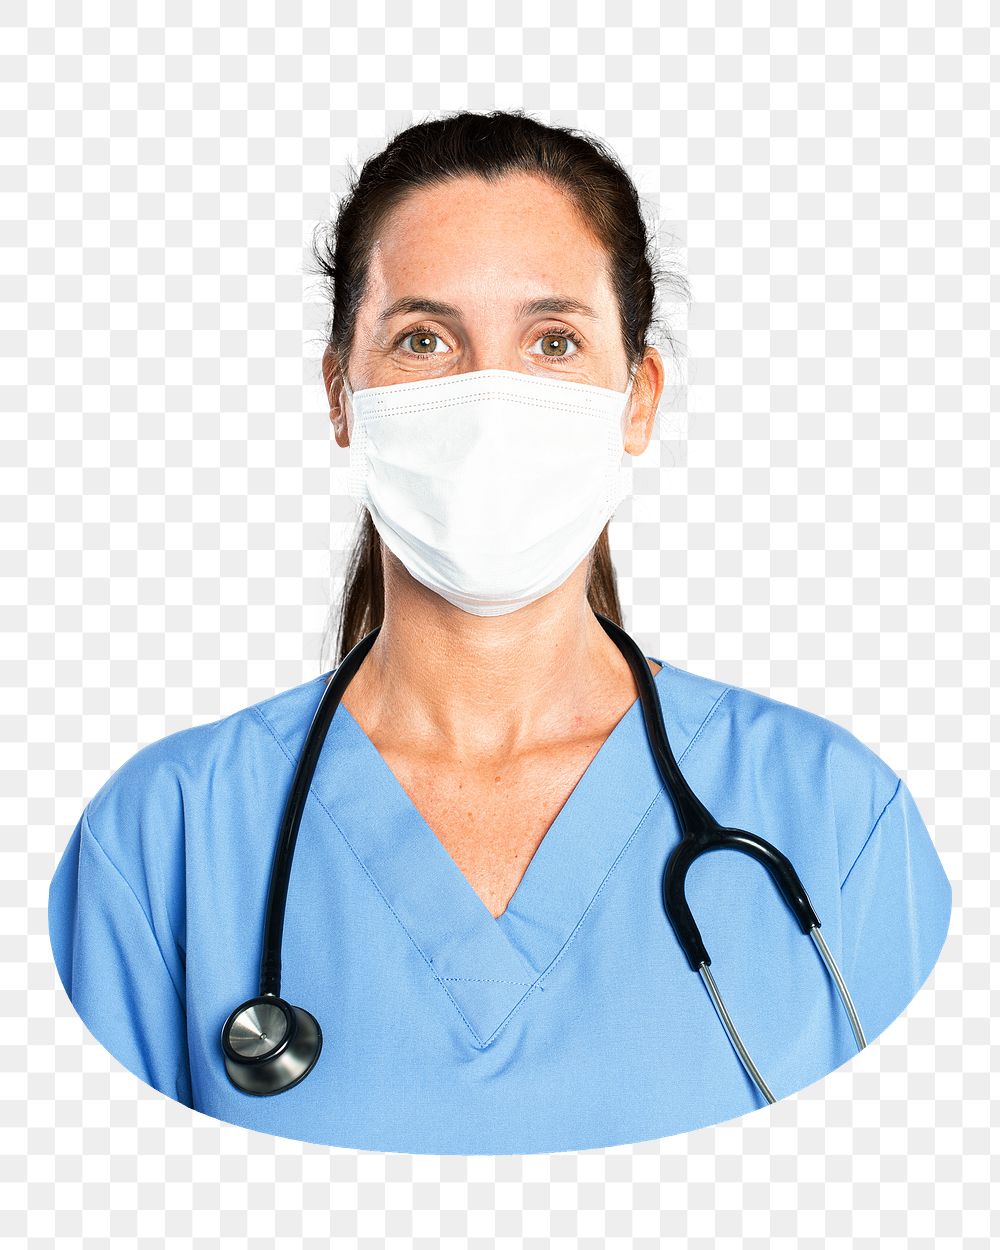 Female doctor png with stethoscope, transparent background